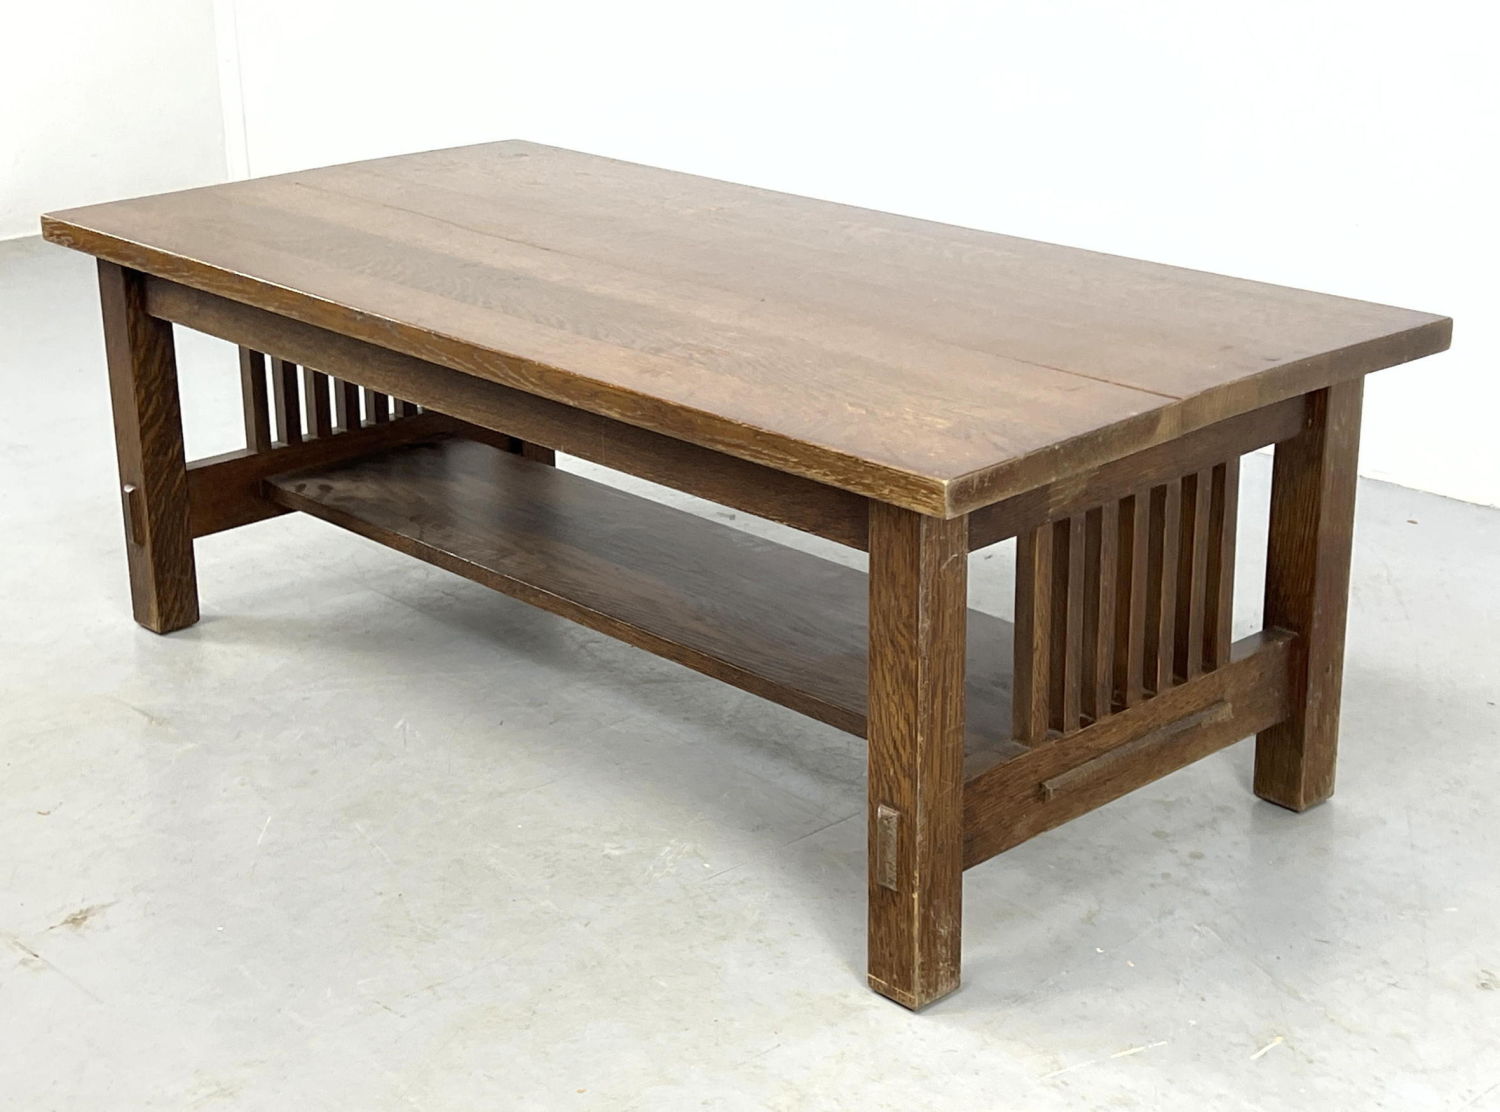 Mission oak style coffee table.